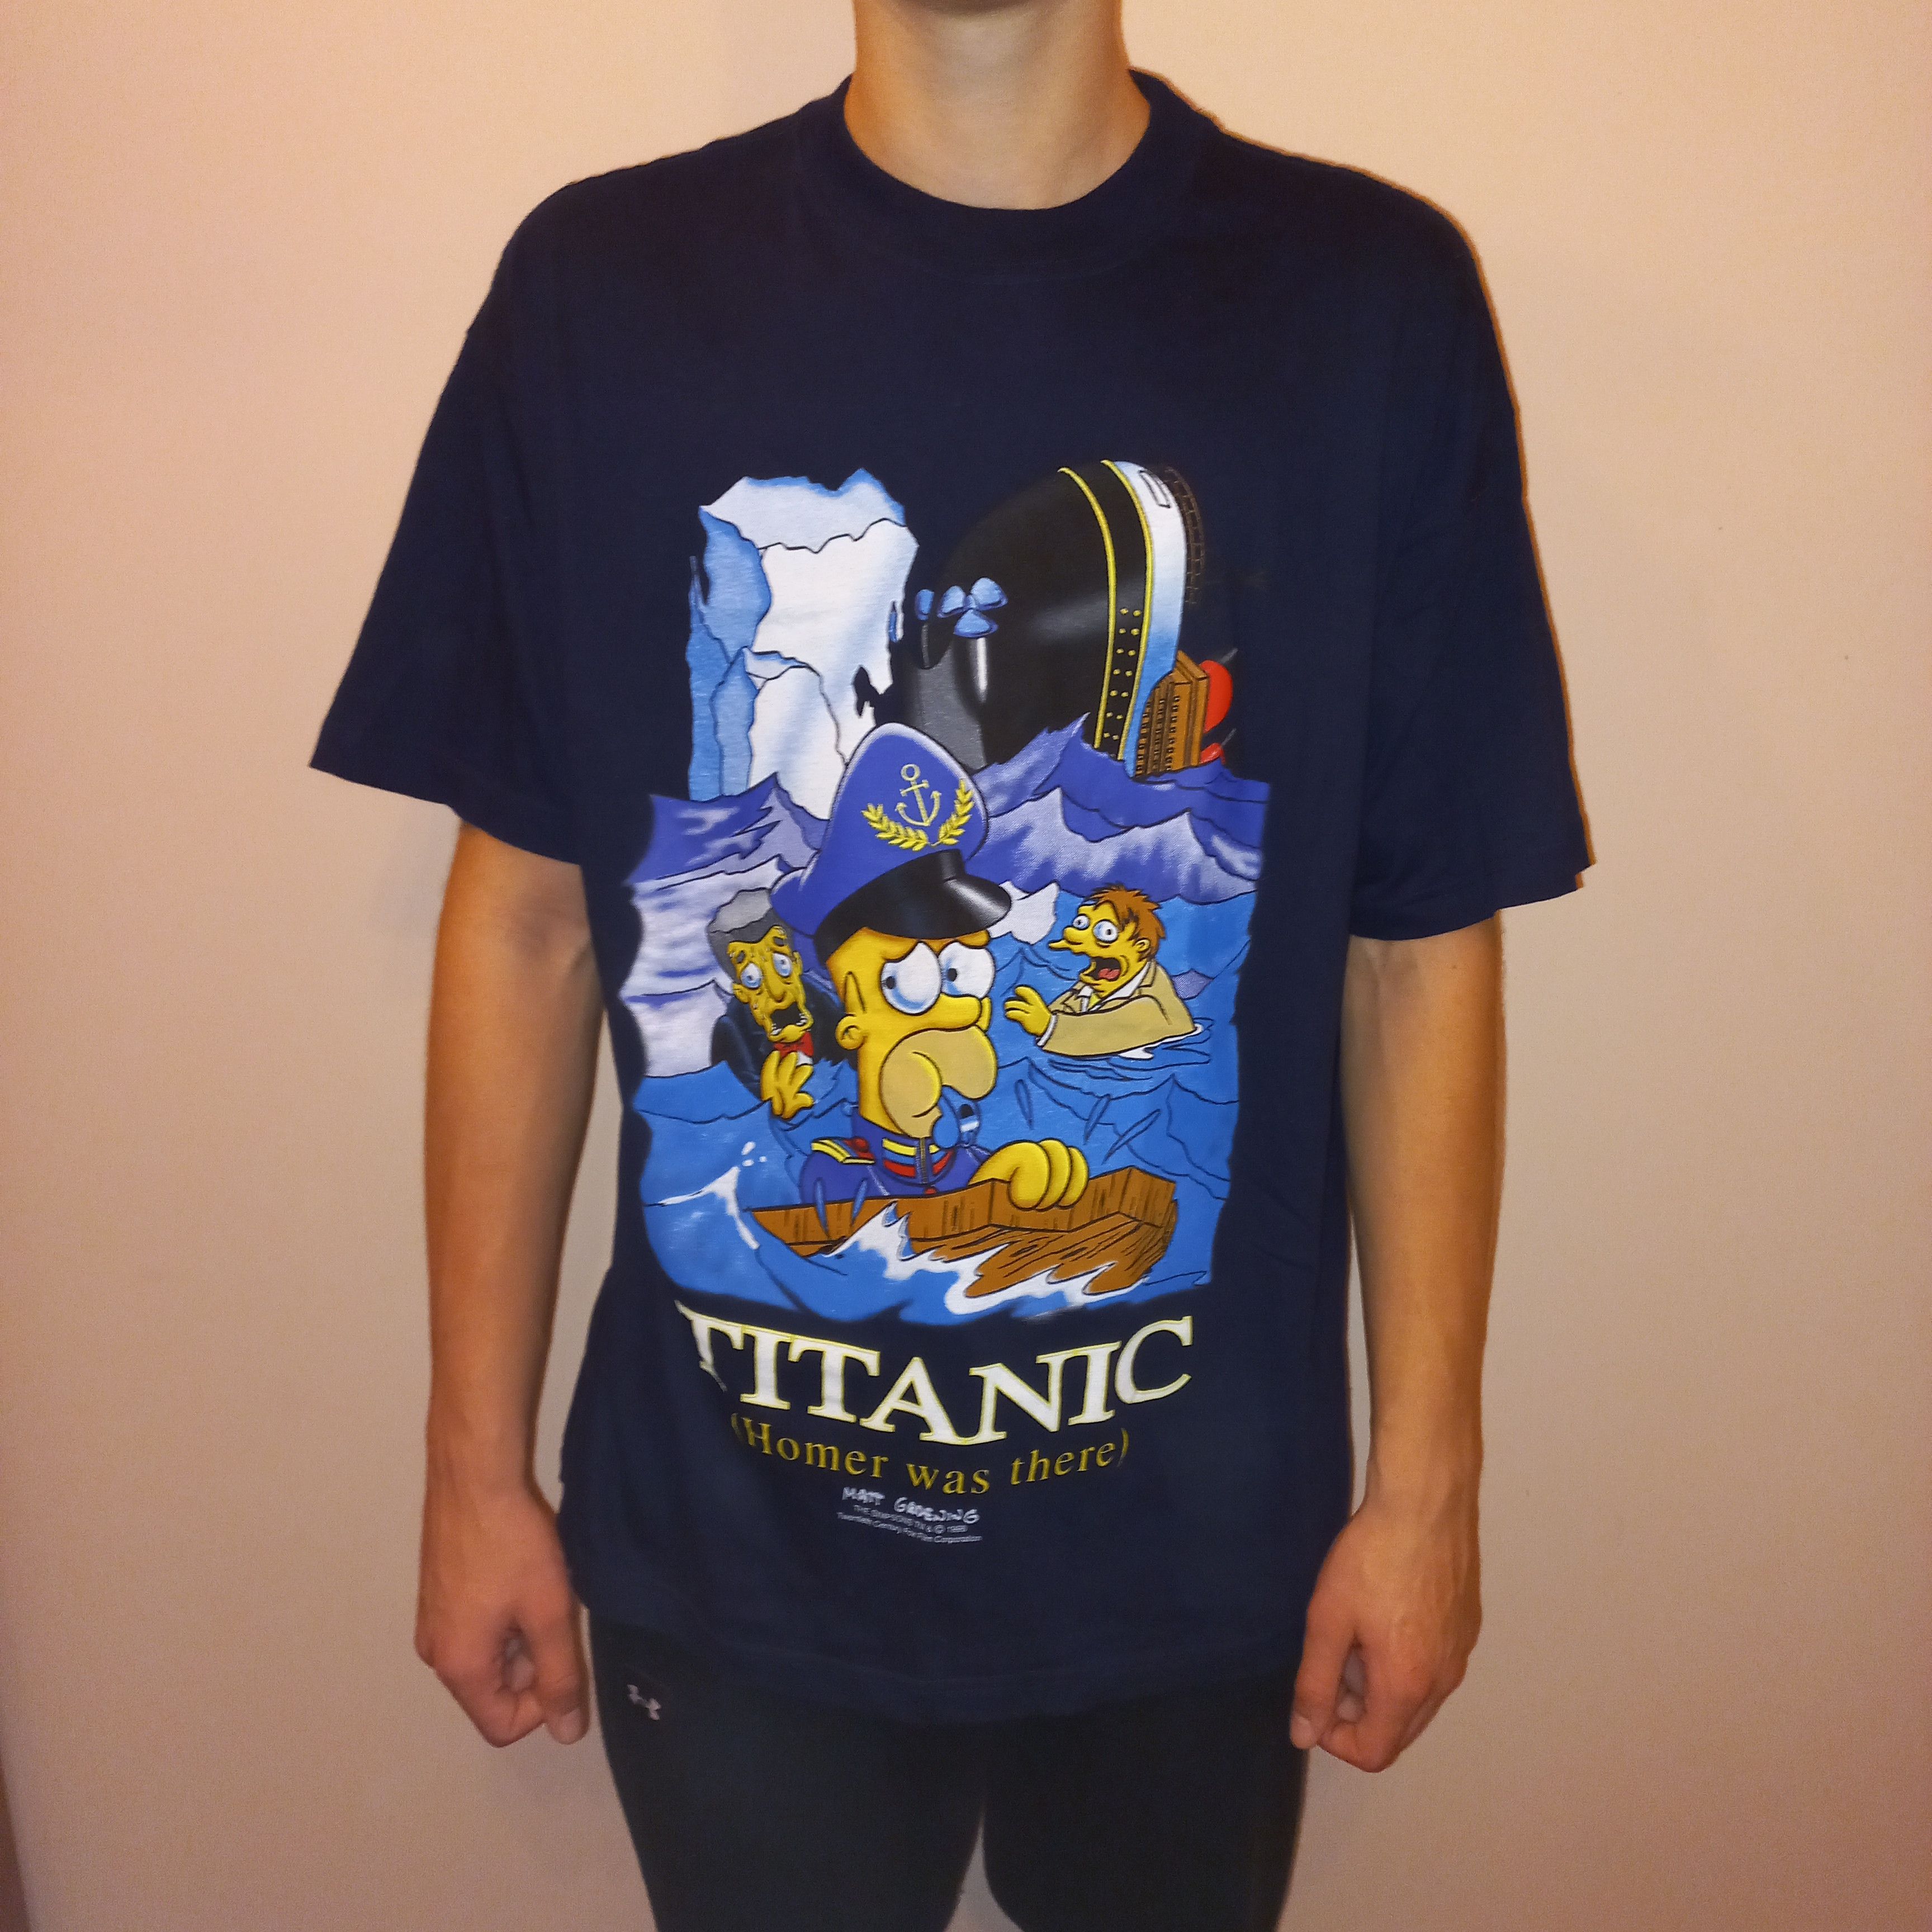 Rwd Redwood Vintage 1998 Titanic The Simpsons 'Homer Was There' Size US XL / EU 56 / 4 - 2 Preview